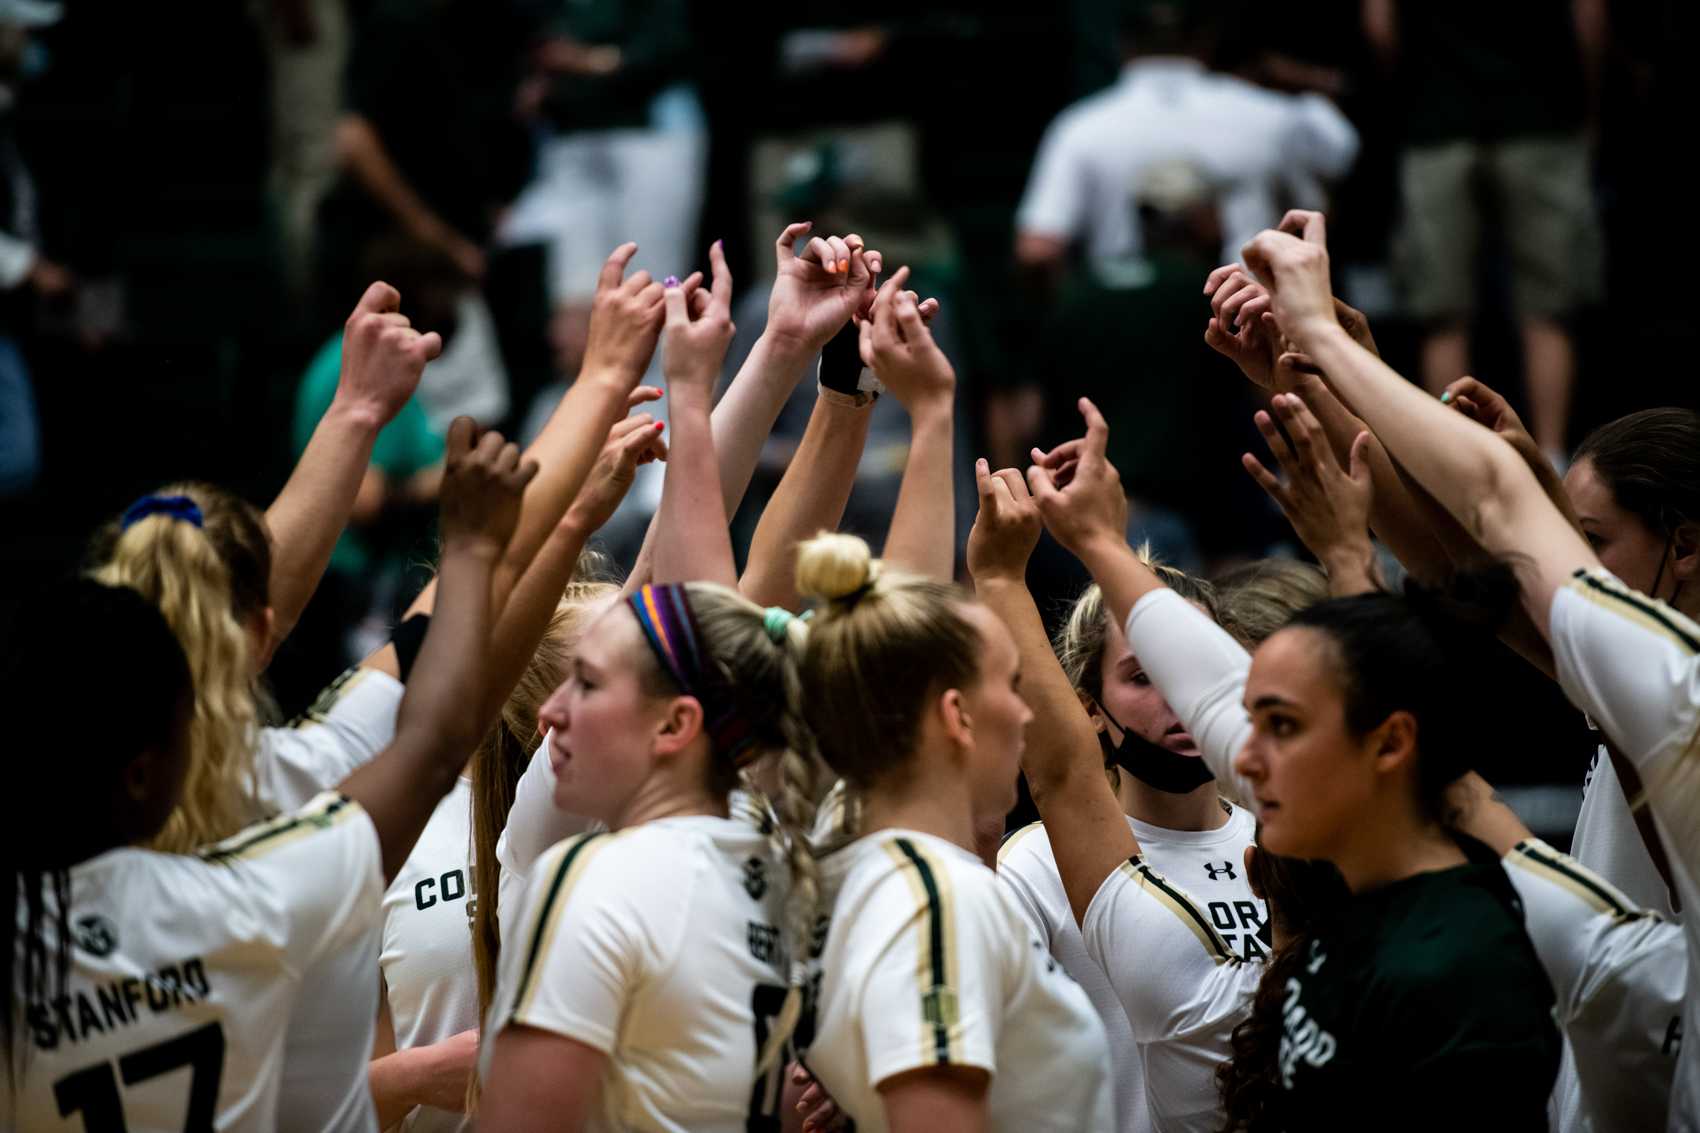 The Colorado State University volleyball team celebrates their 3-0 win over the University of Wyoming